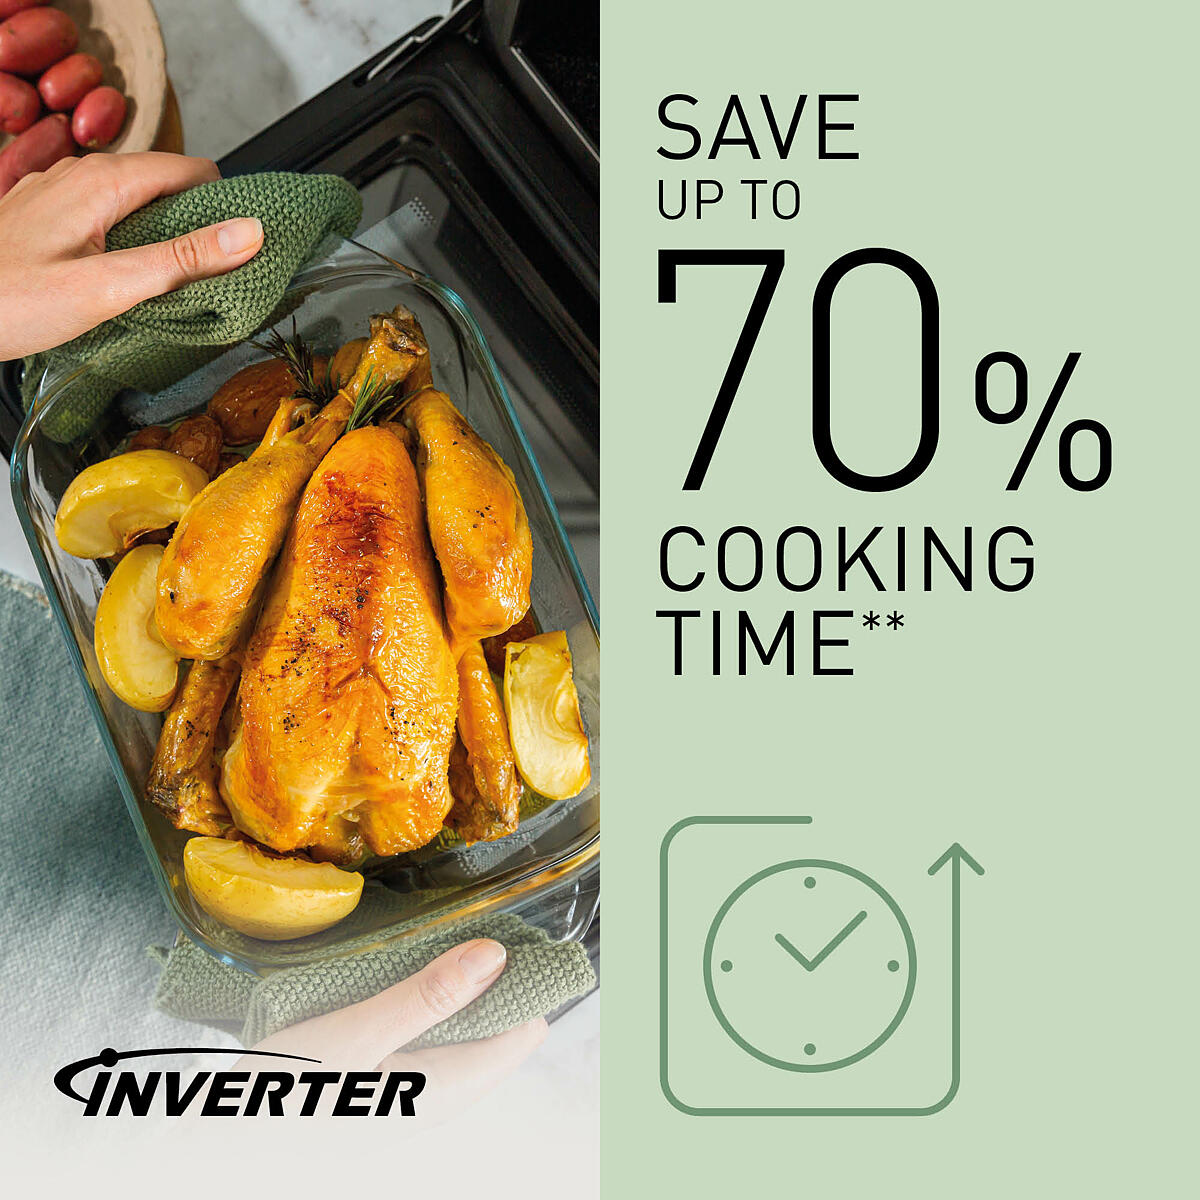 Save up to 70% cooking time**